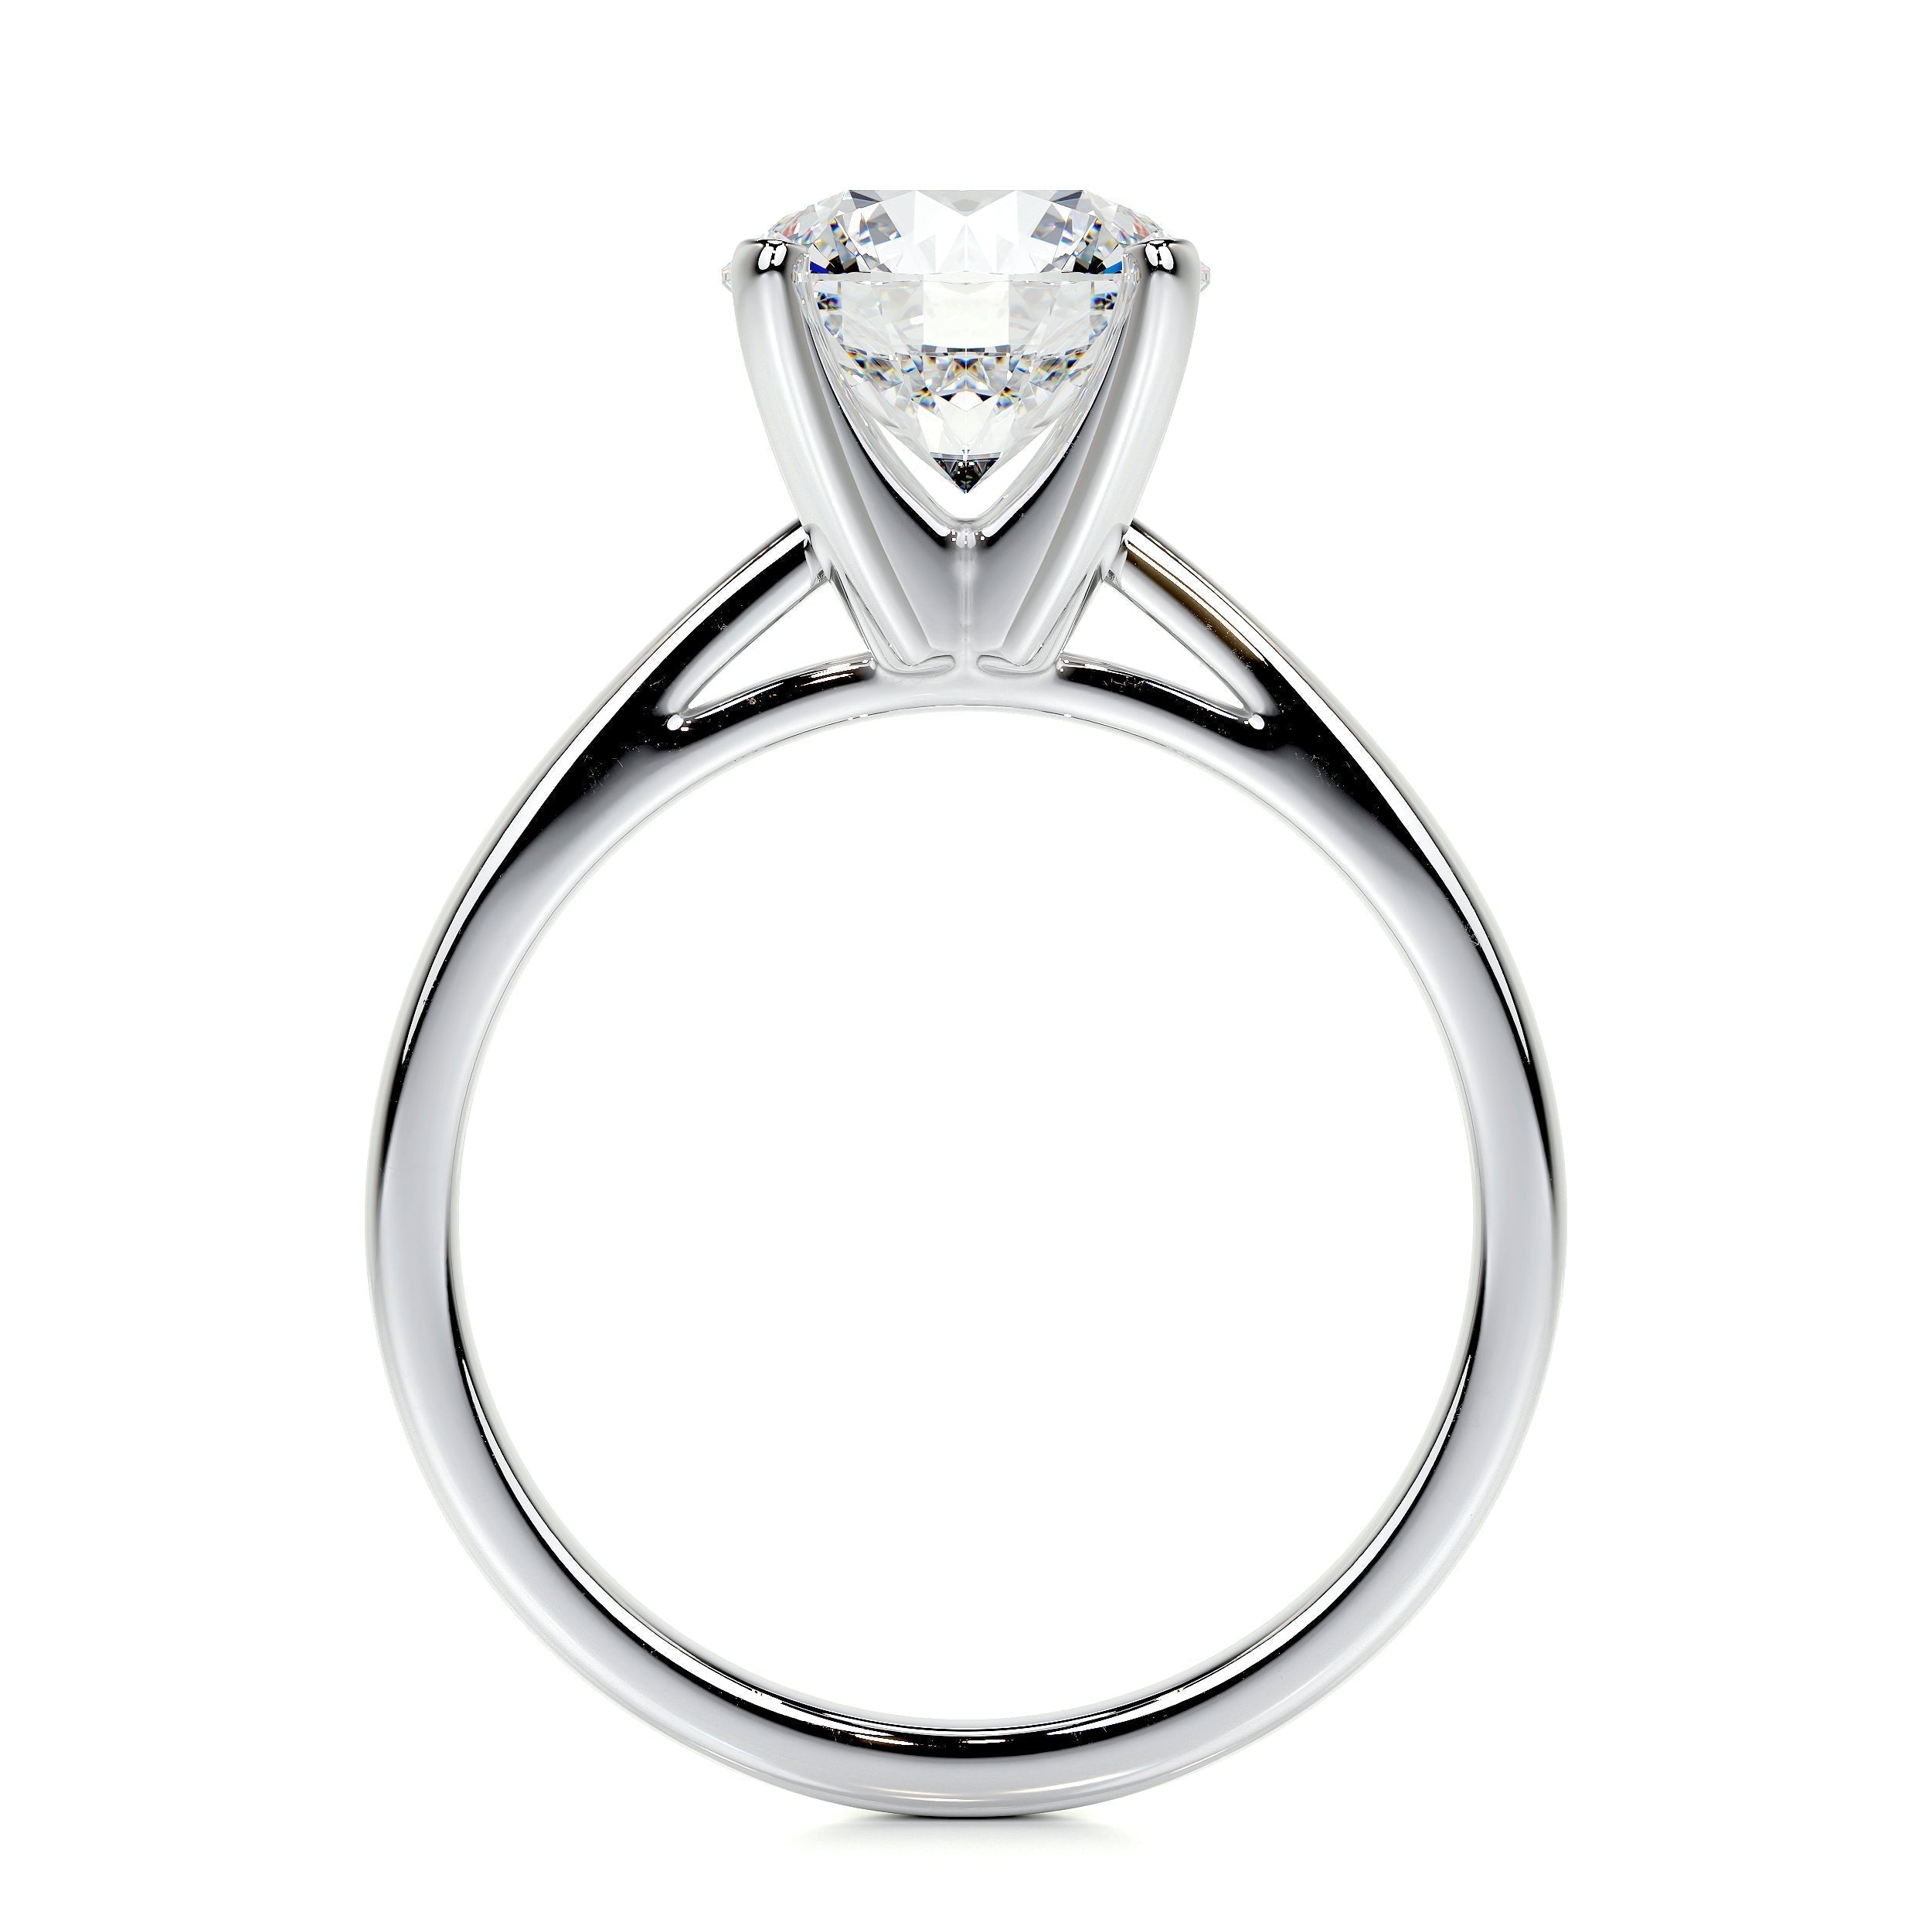 2.0 CT Round Solitaire CVD H/VS2 Diamond Engagement Ring 6